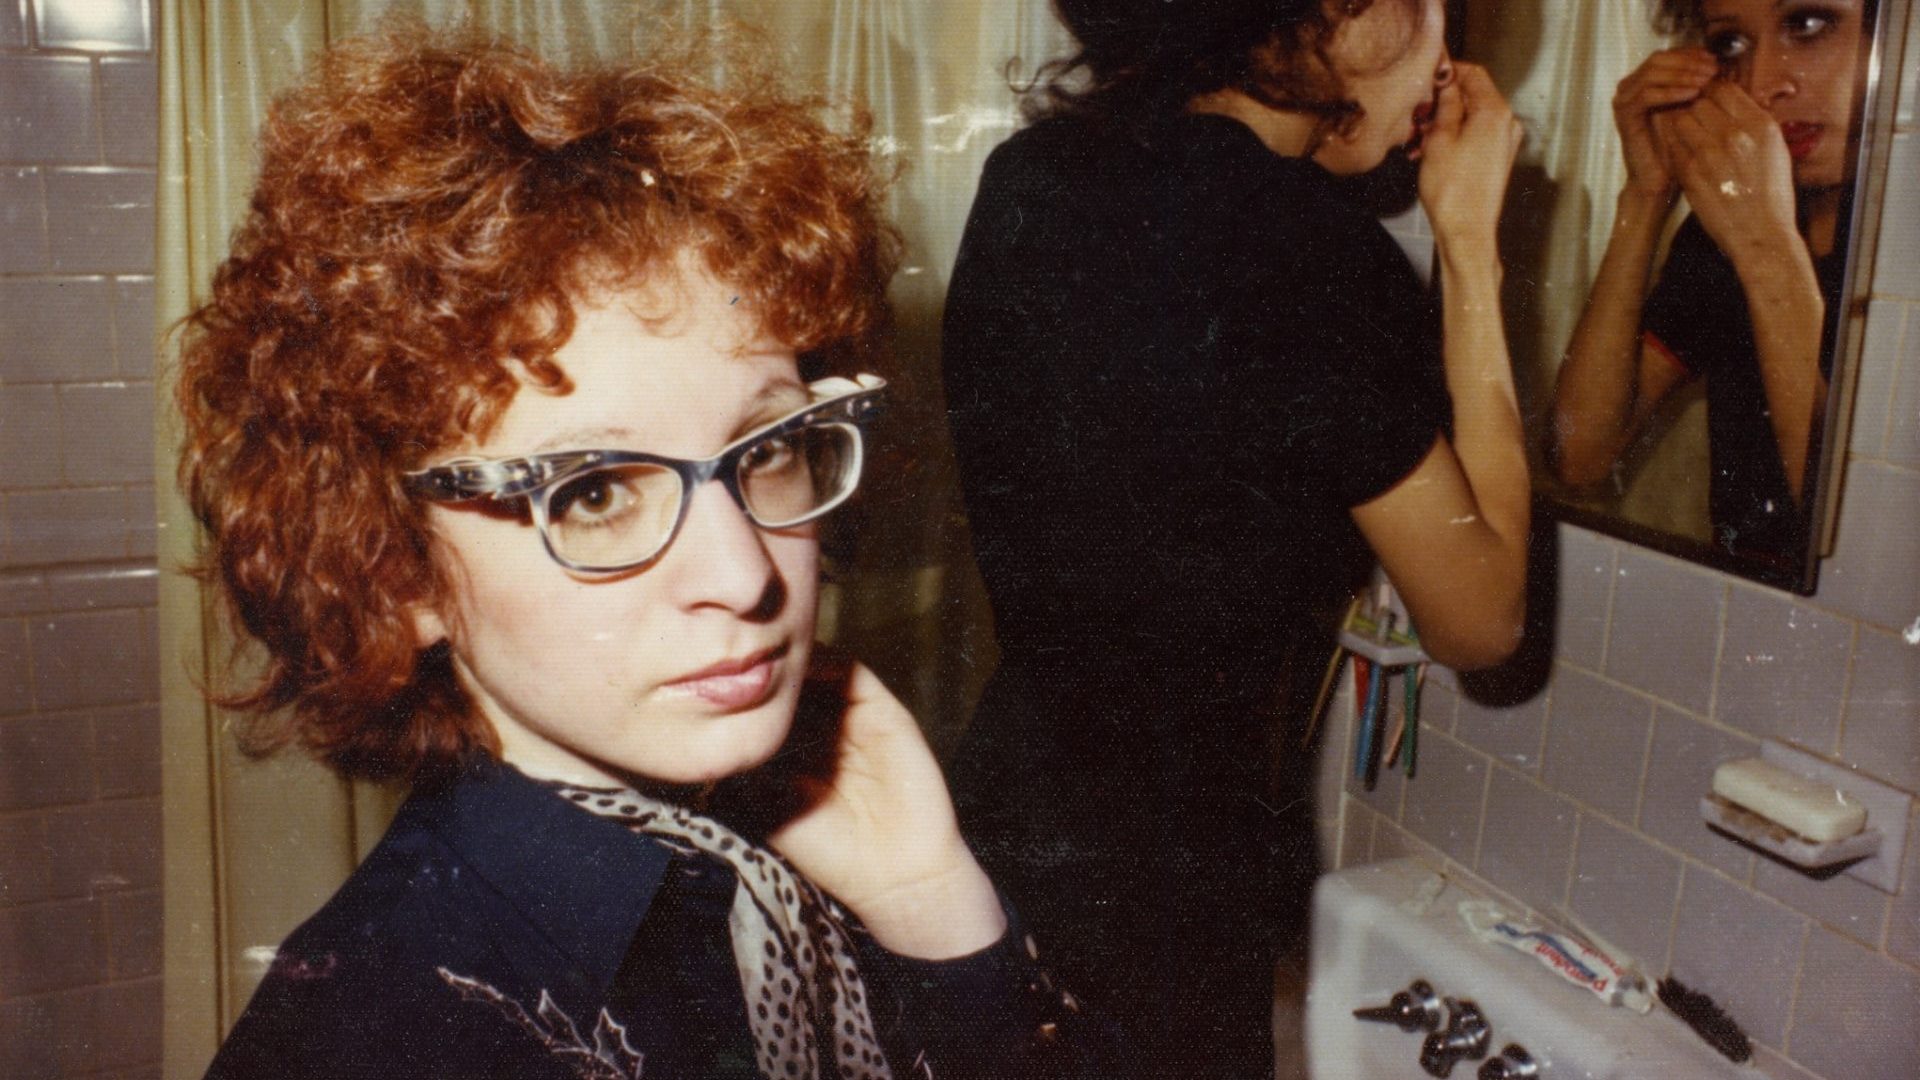 Photographer Nan Goldin in documentary All the Beauty and Bloodshed. Photo: Neon